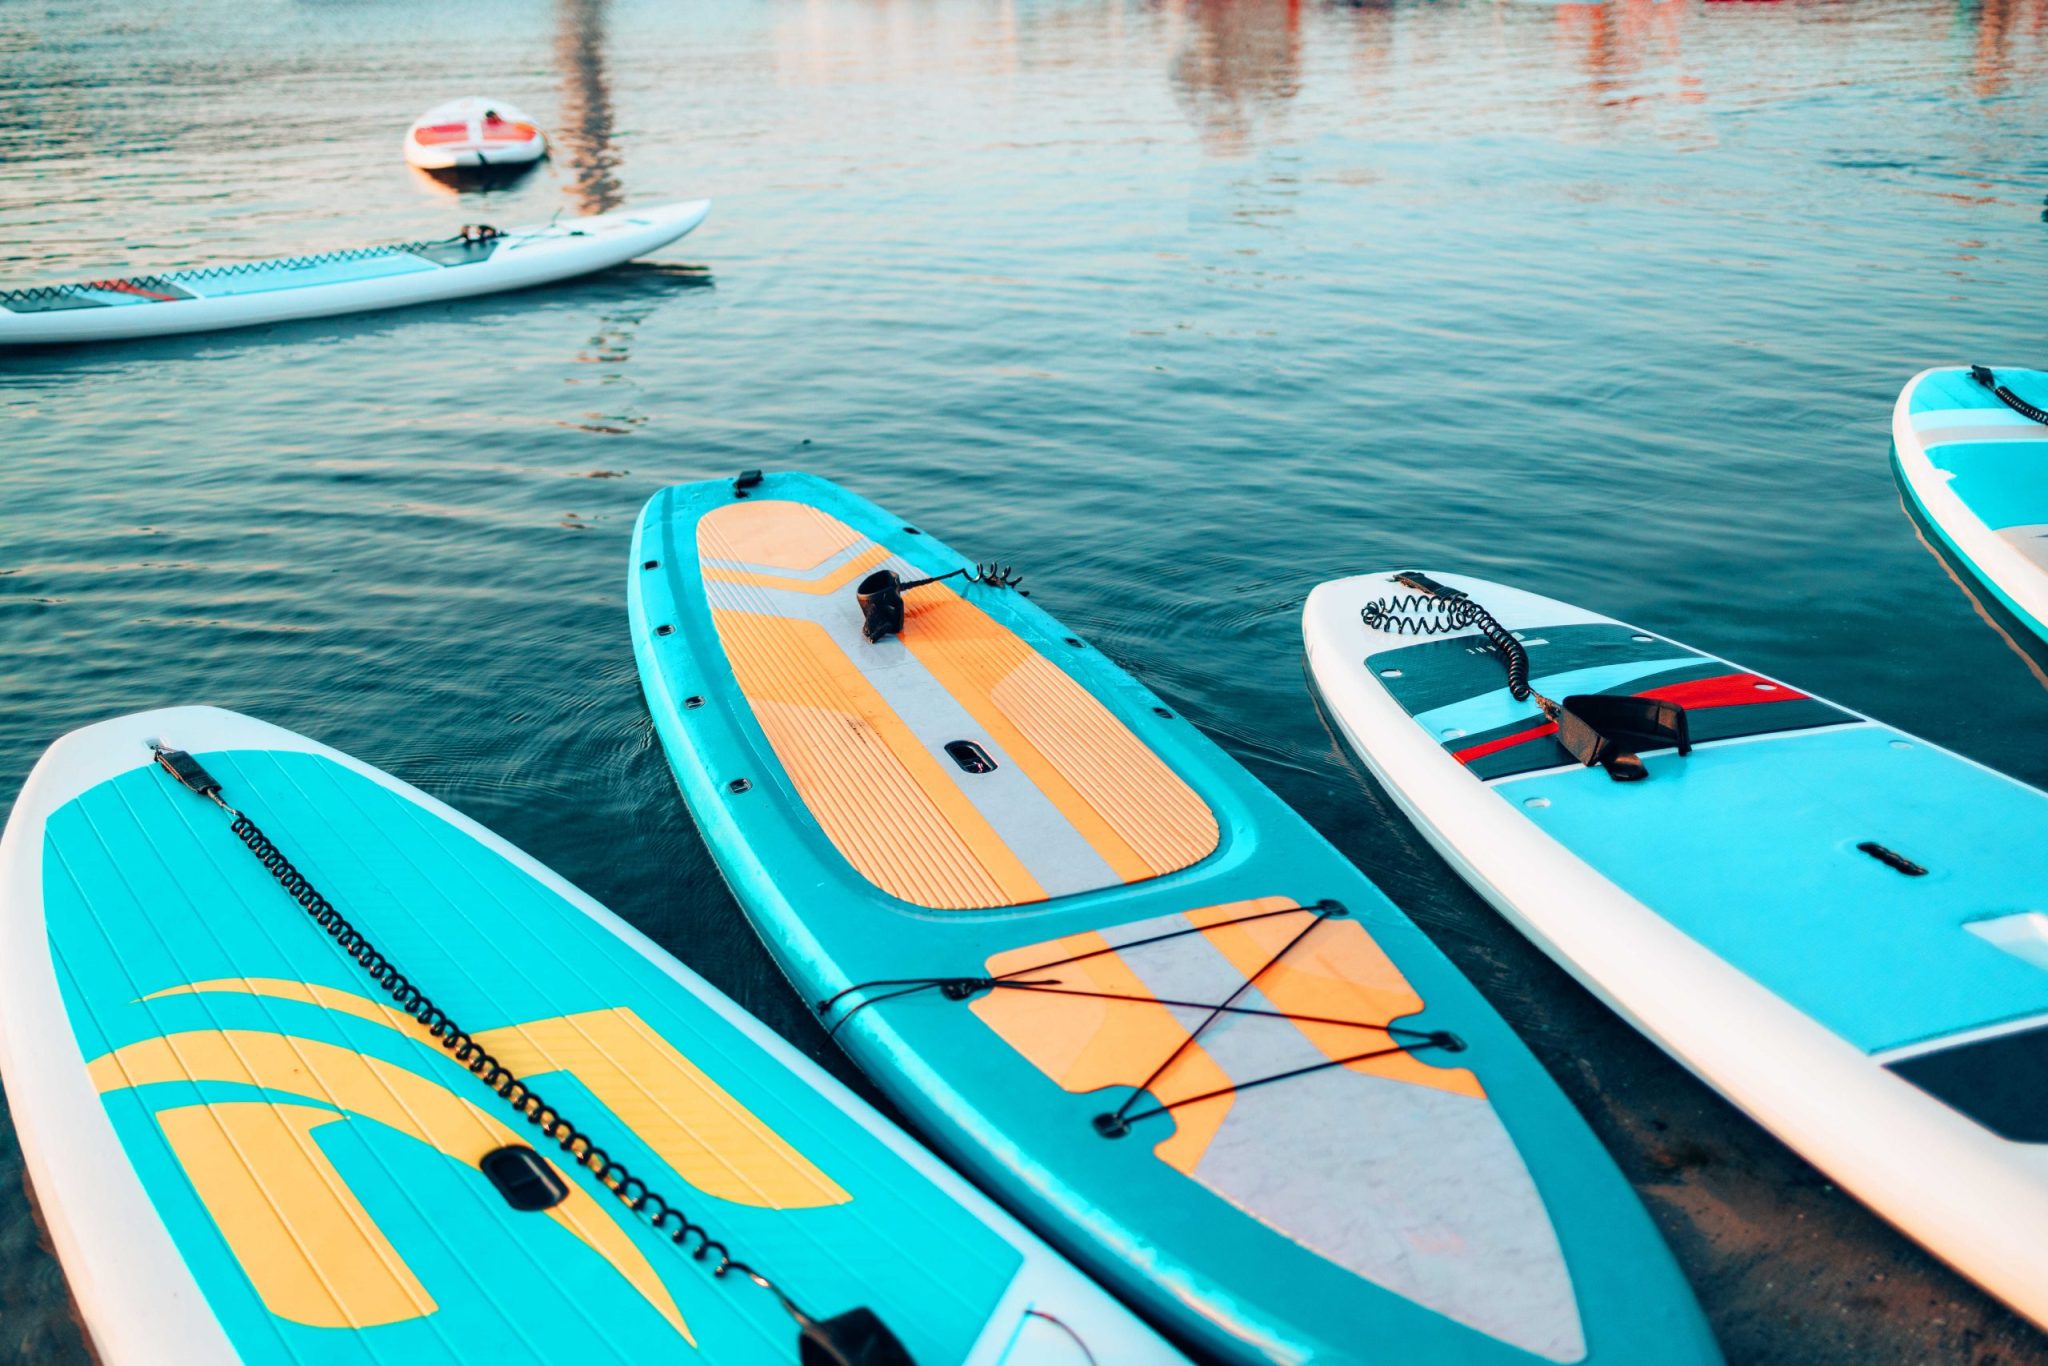 Standup Paddle Board Rentals sup stand up paddle board on the background blue w 2023 11 27 05 18 21 utc optimized scaled  Product Single Template sup stand up paddle board on the background blue w 2023 11 27 05 18 21 utc optimized scaled